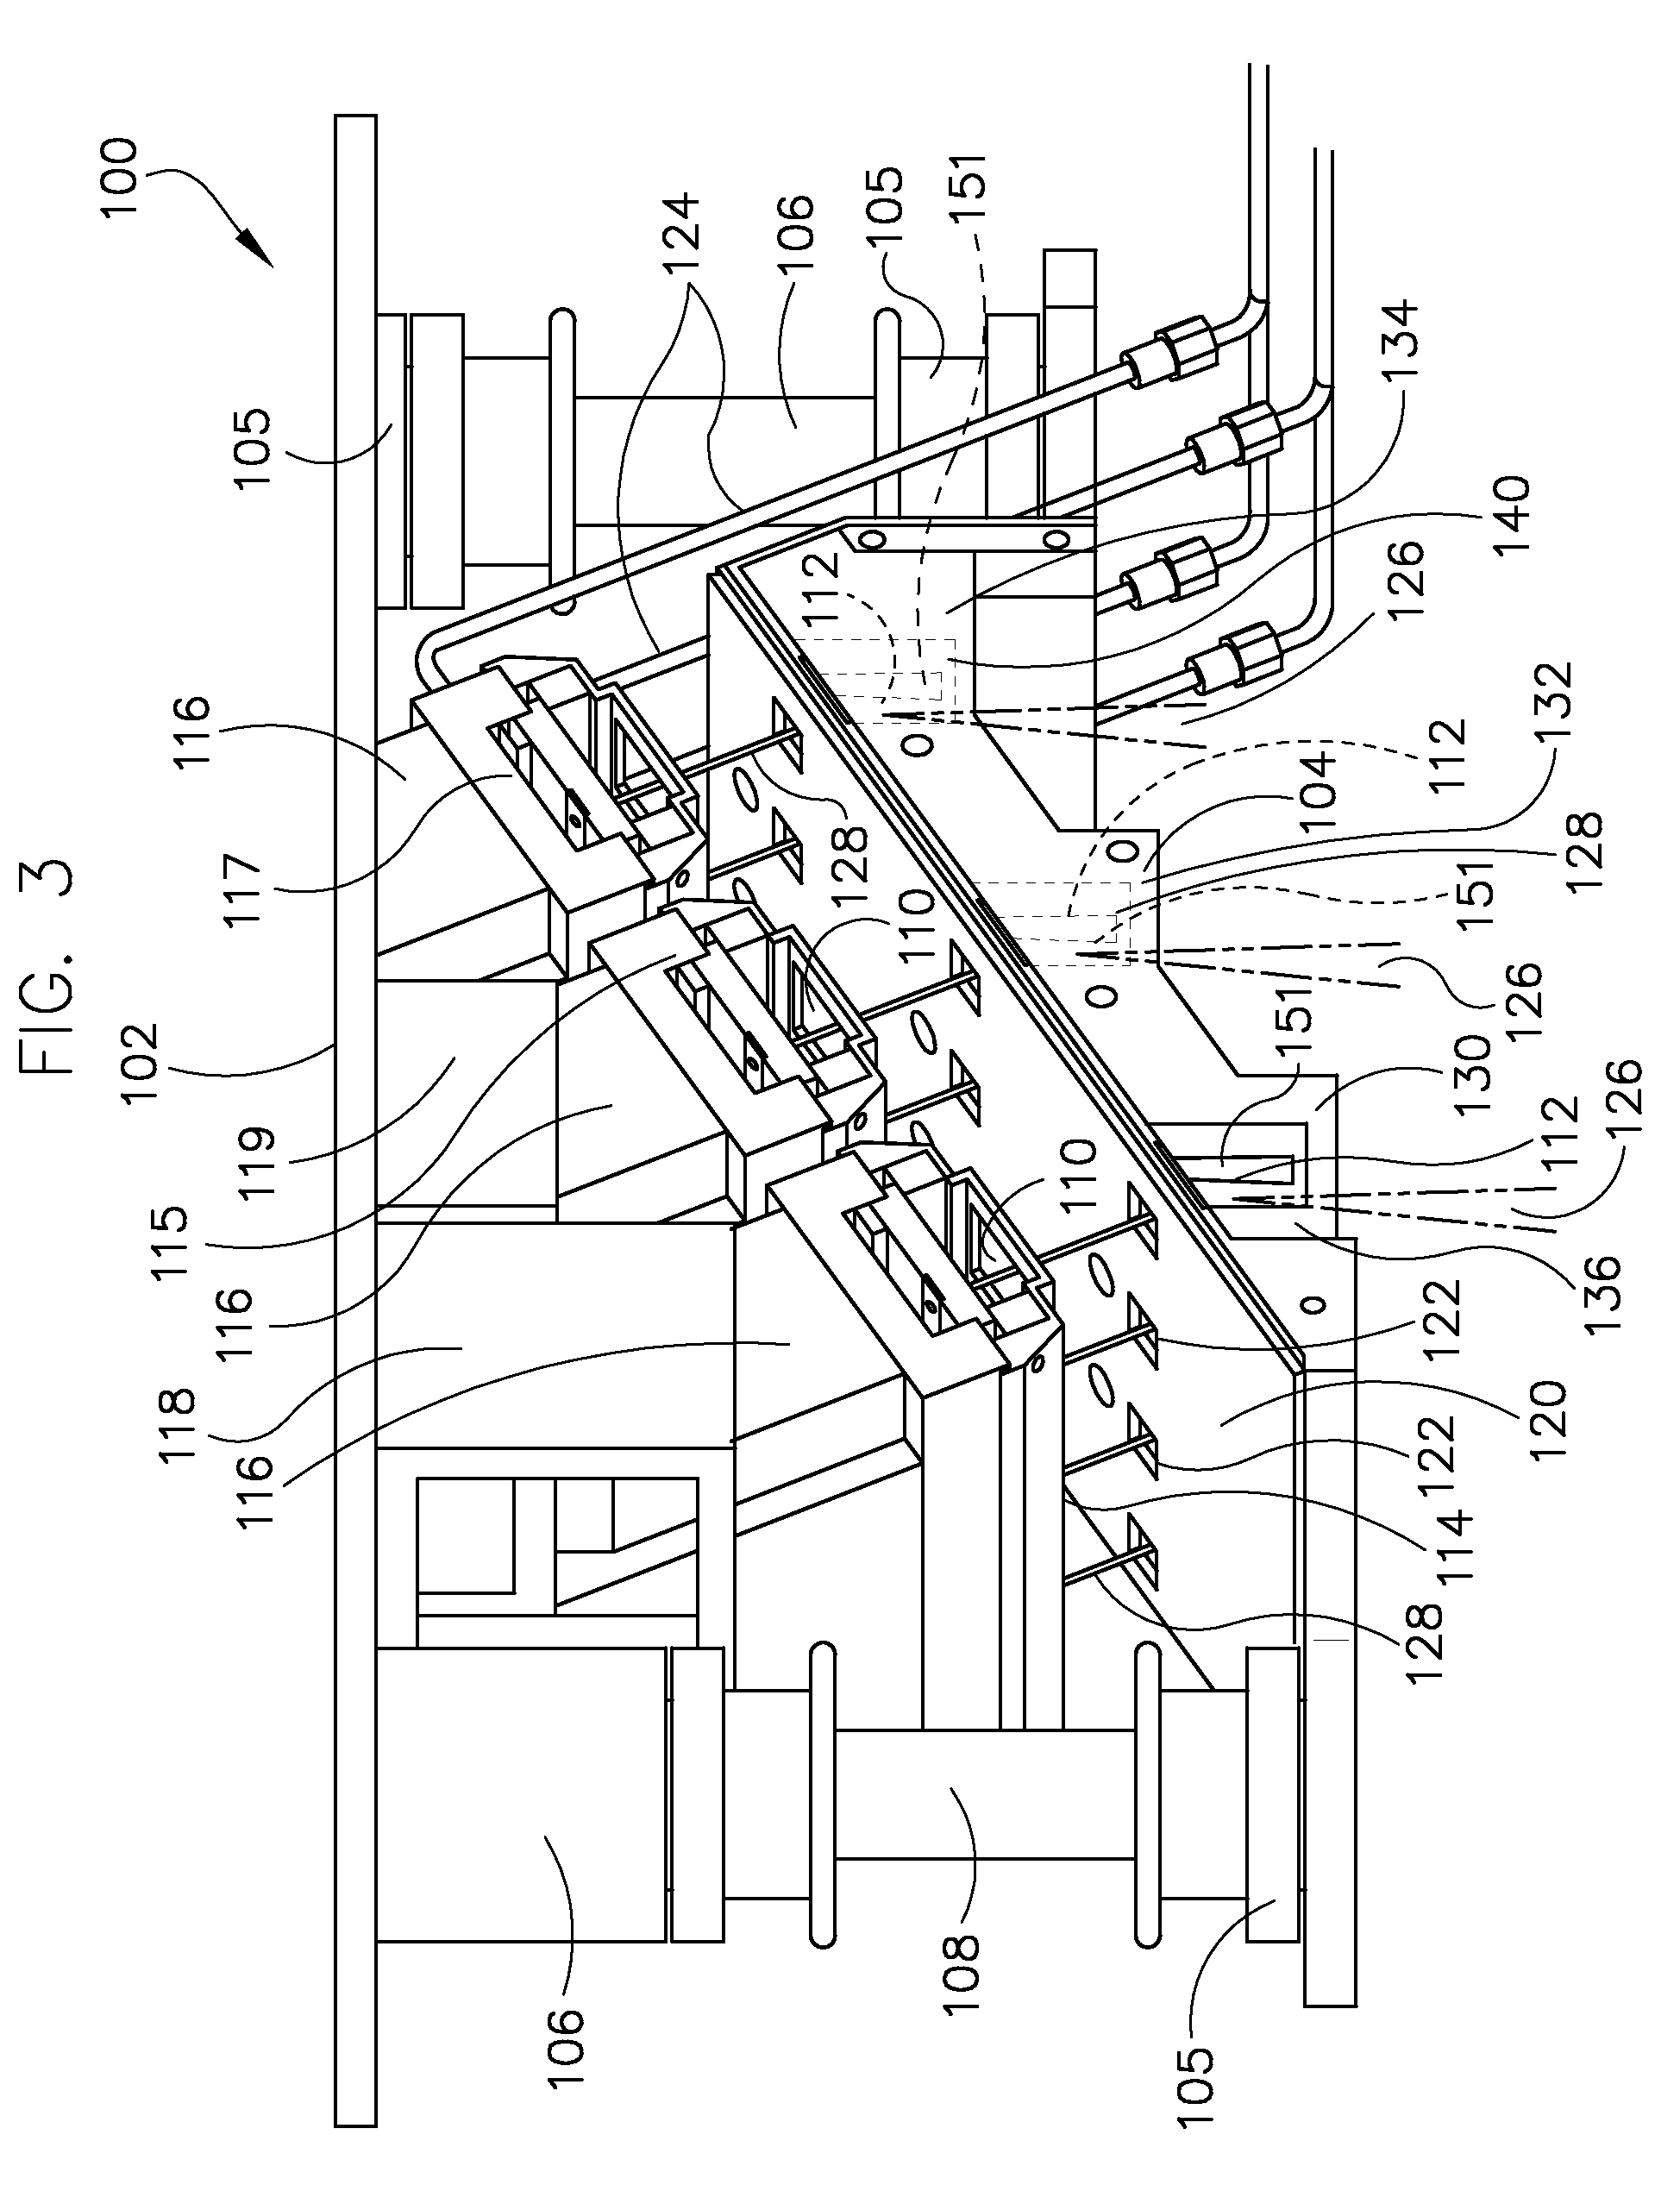 Apparatus for providing shielding in a multispot x-ray source and method of making same